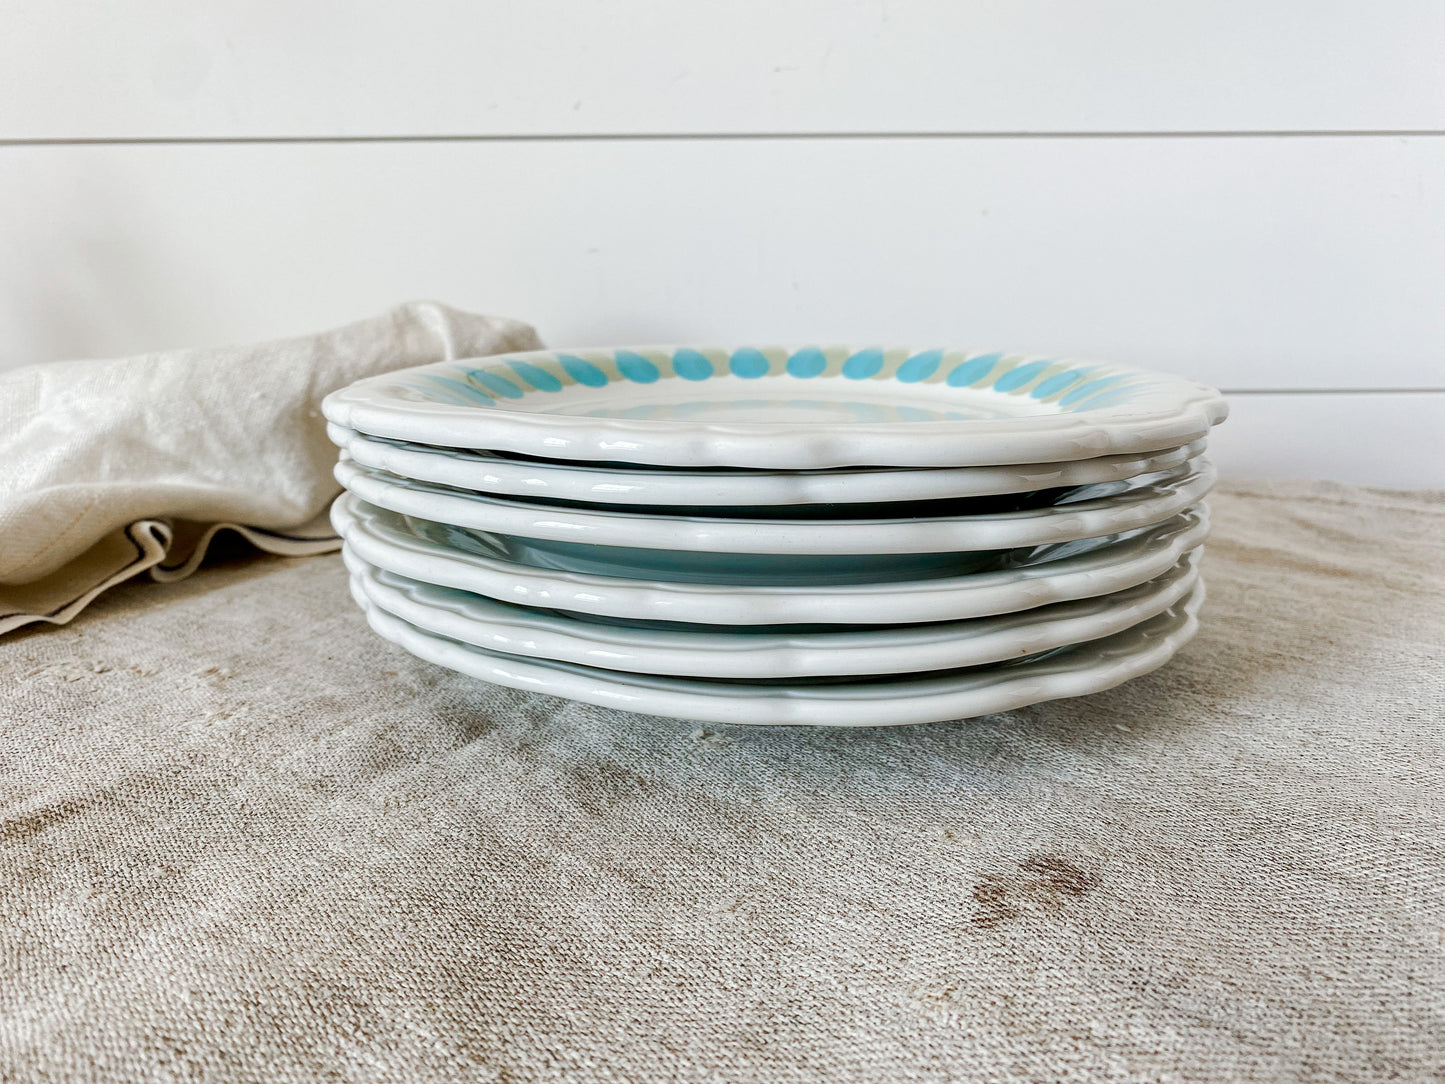 Vintage Set of 6 Wallace China 1940s Ironstone Plates | Blue Green Retro Restaurant Ware